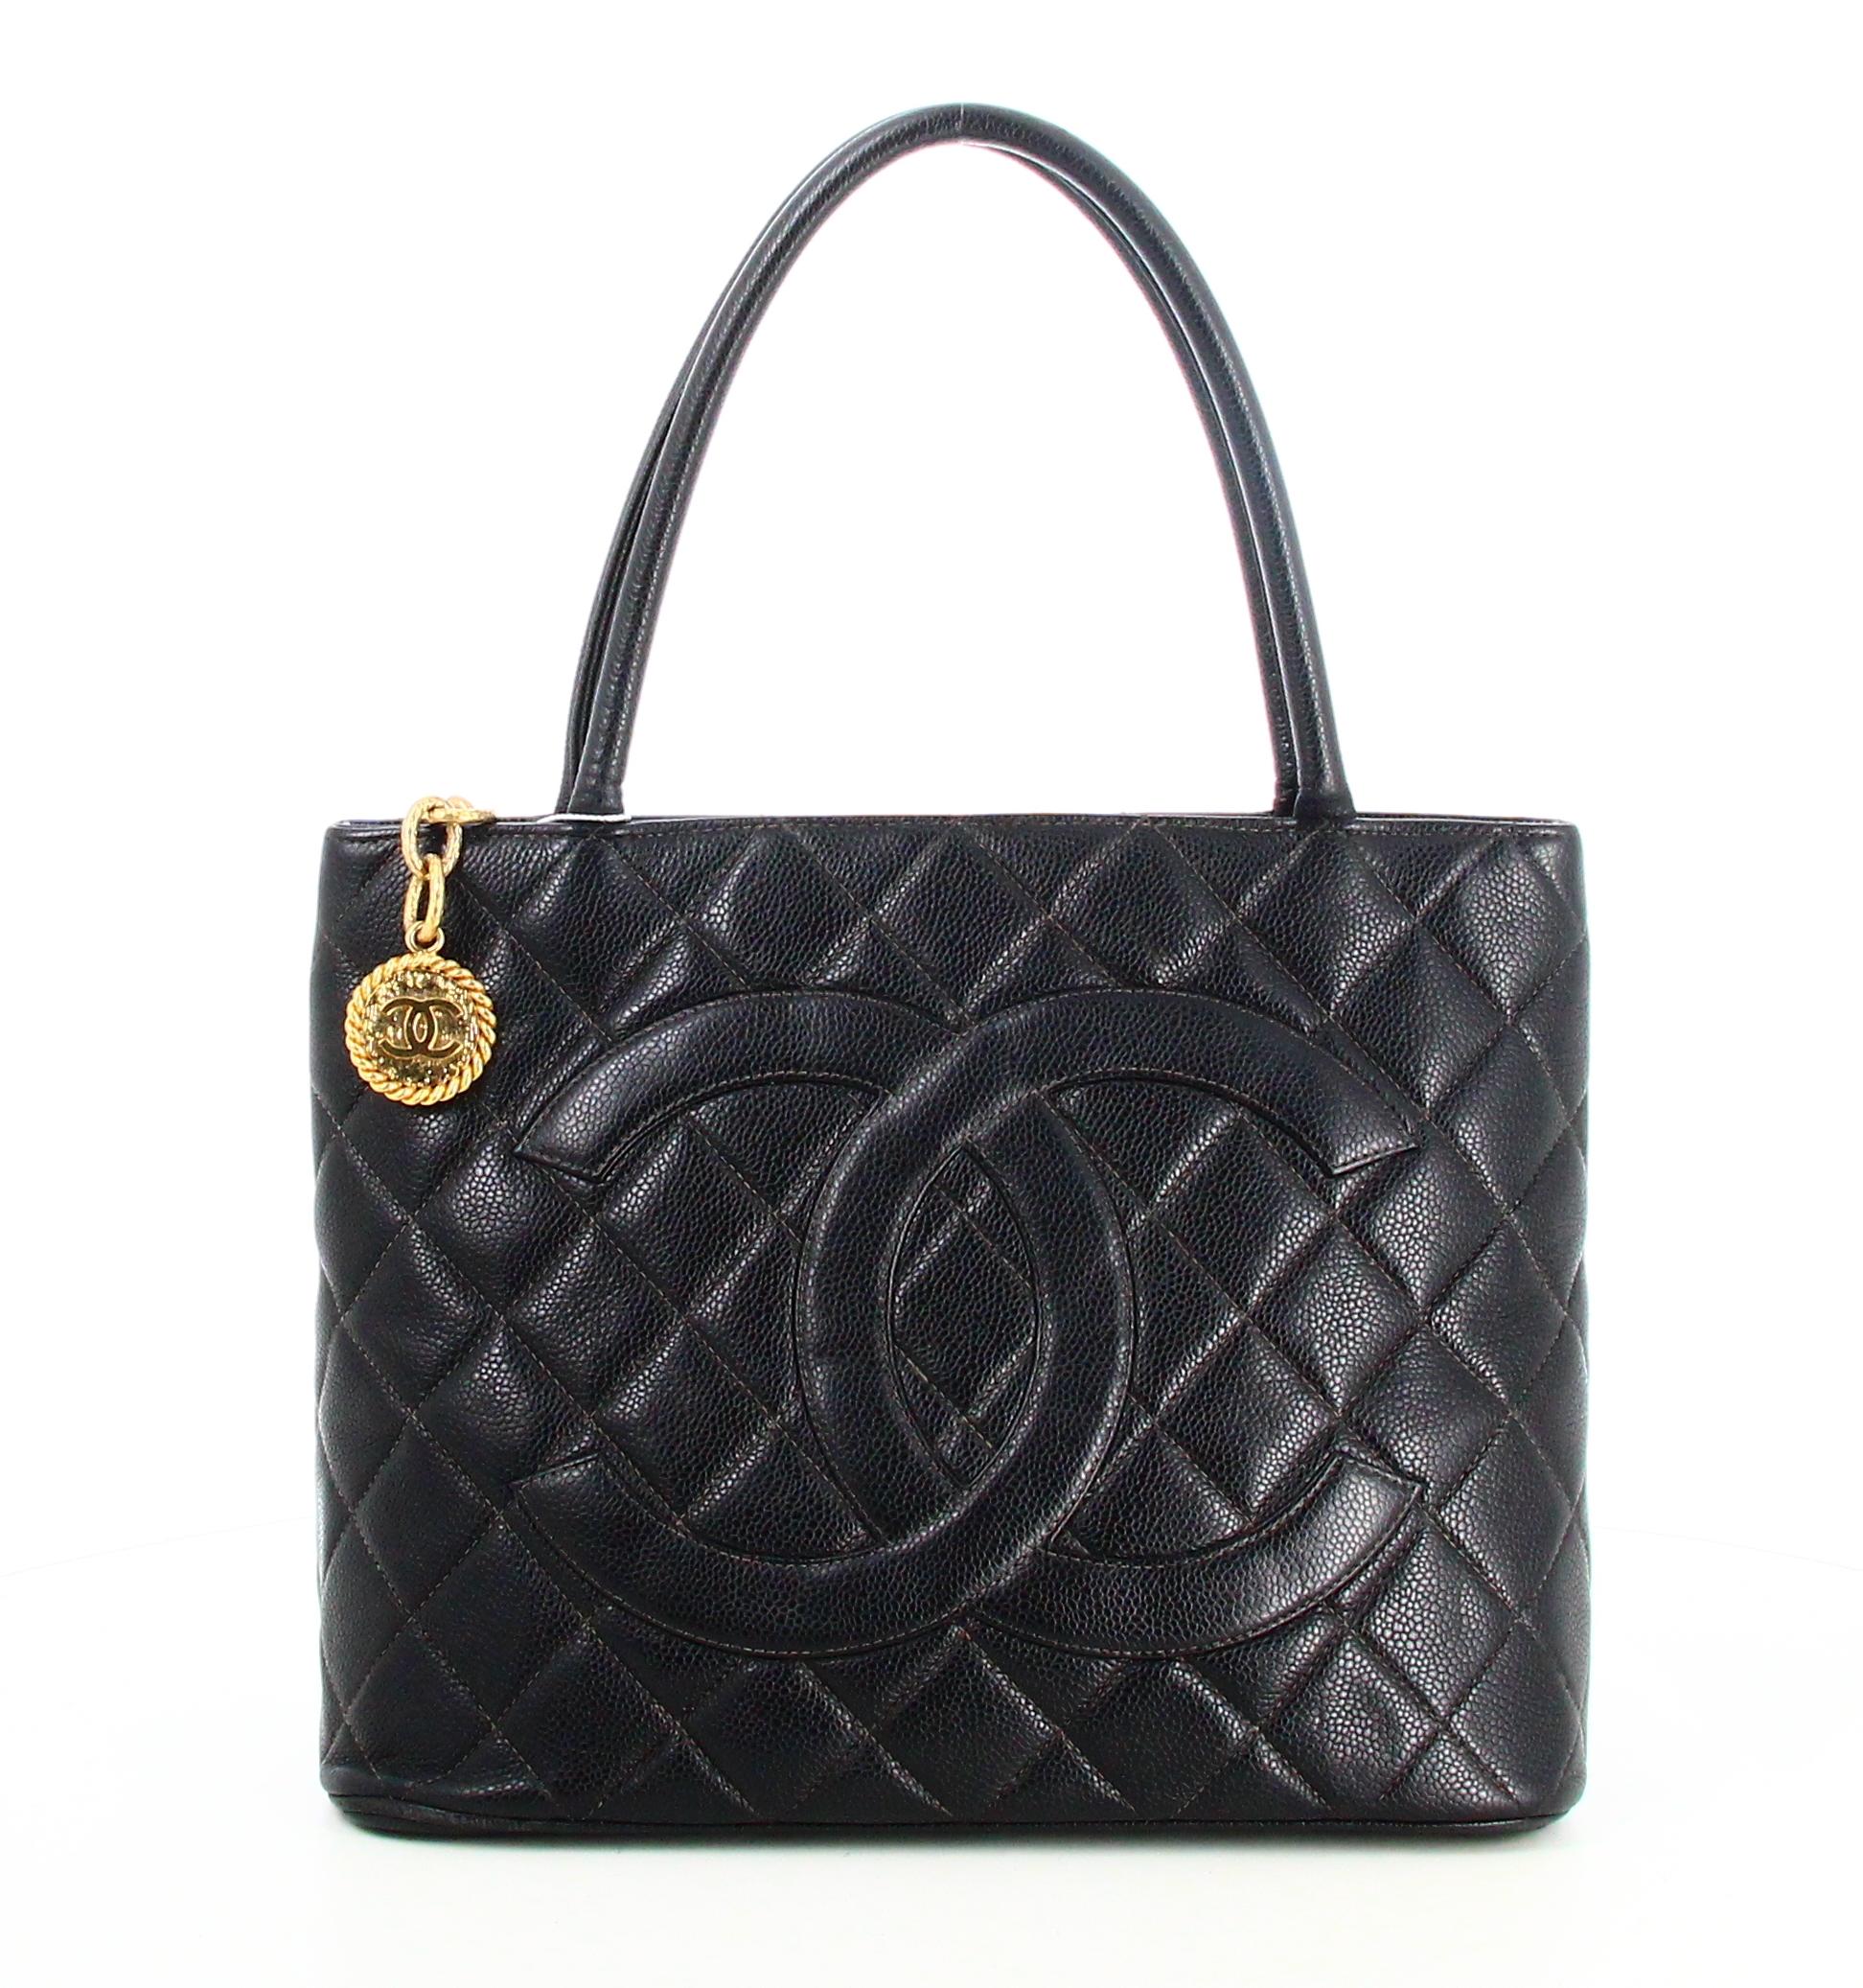 1999 Chanel Padded Black Leather Medallion Handbag 

- Good condition. Shows slight signs of wear over time. 
- Chanel Medallion Bag 
- Quilted black leather
- Two black leather straps 
- Golden chain medallion 
- Double C logo on front 
- Interior: